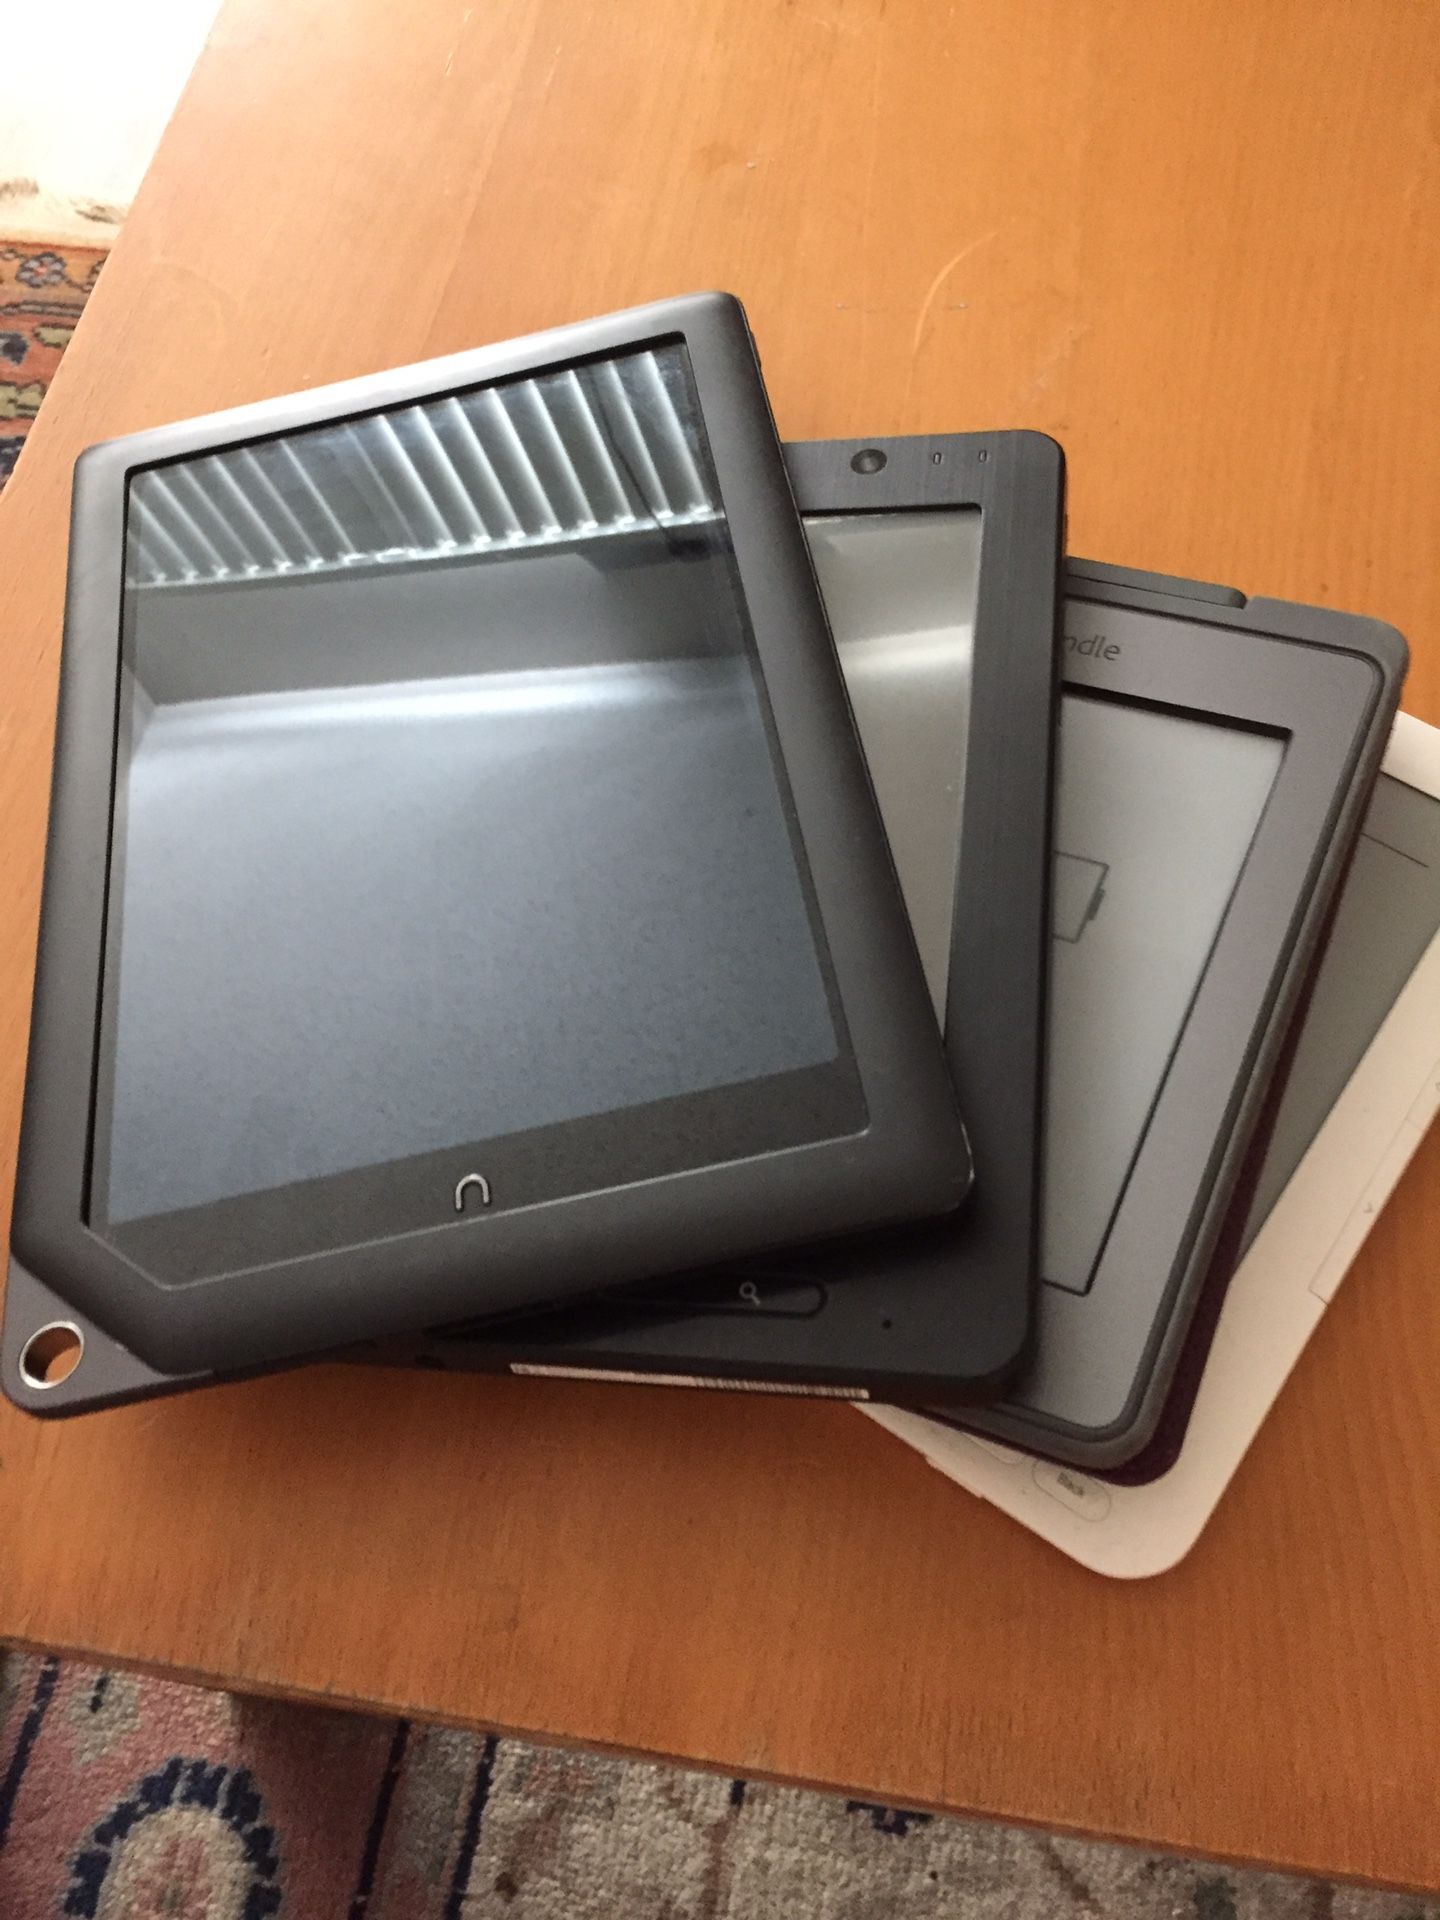 Amazon NOOK fire kindle and very nice tablet $40